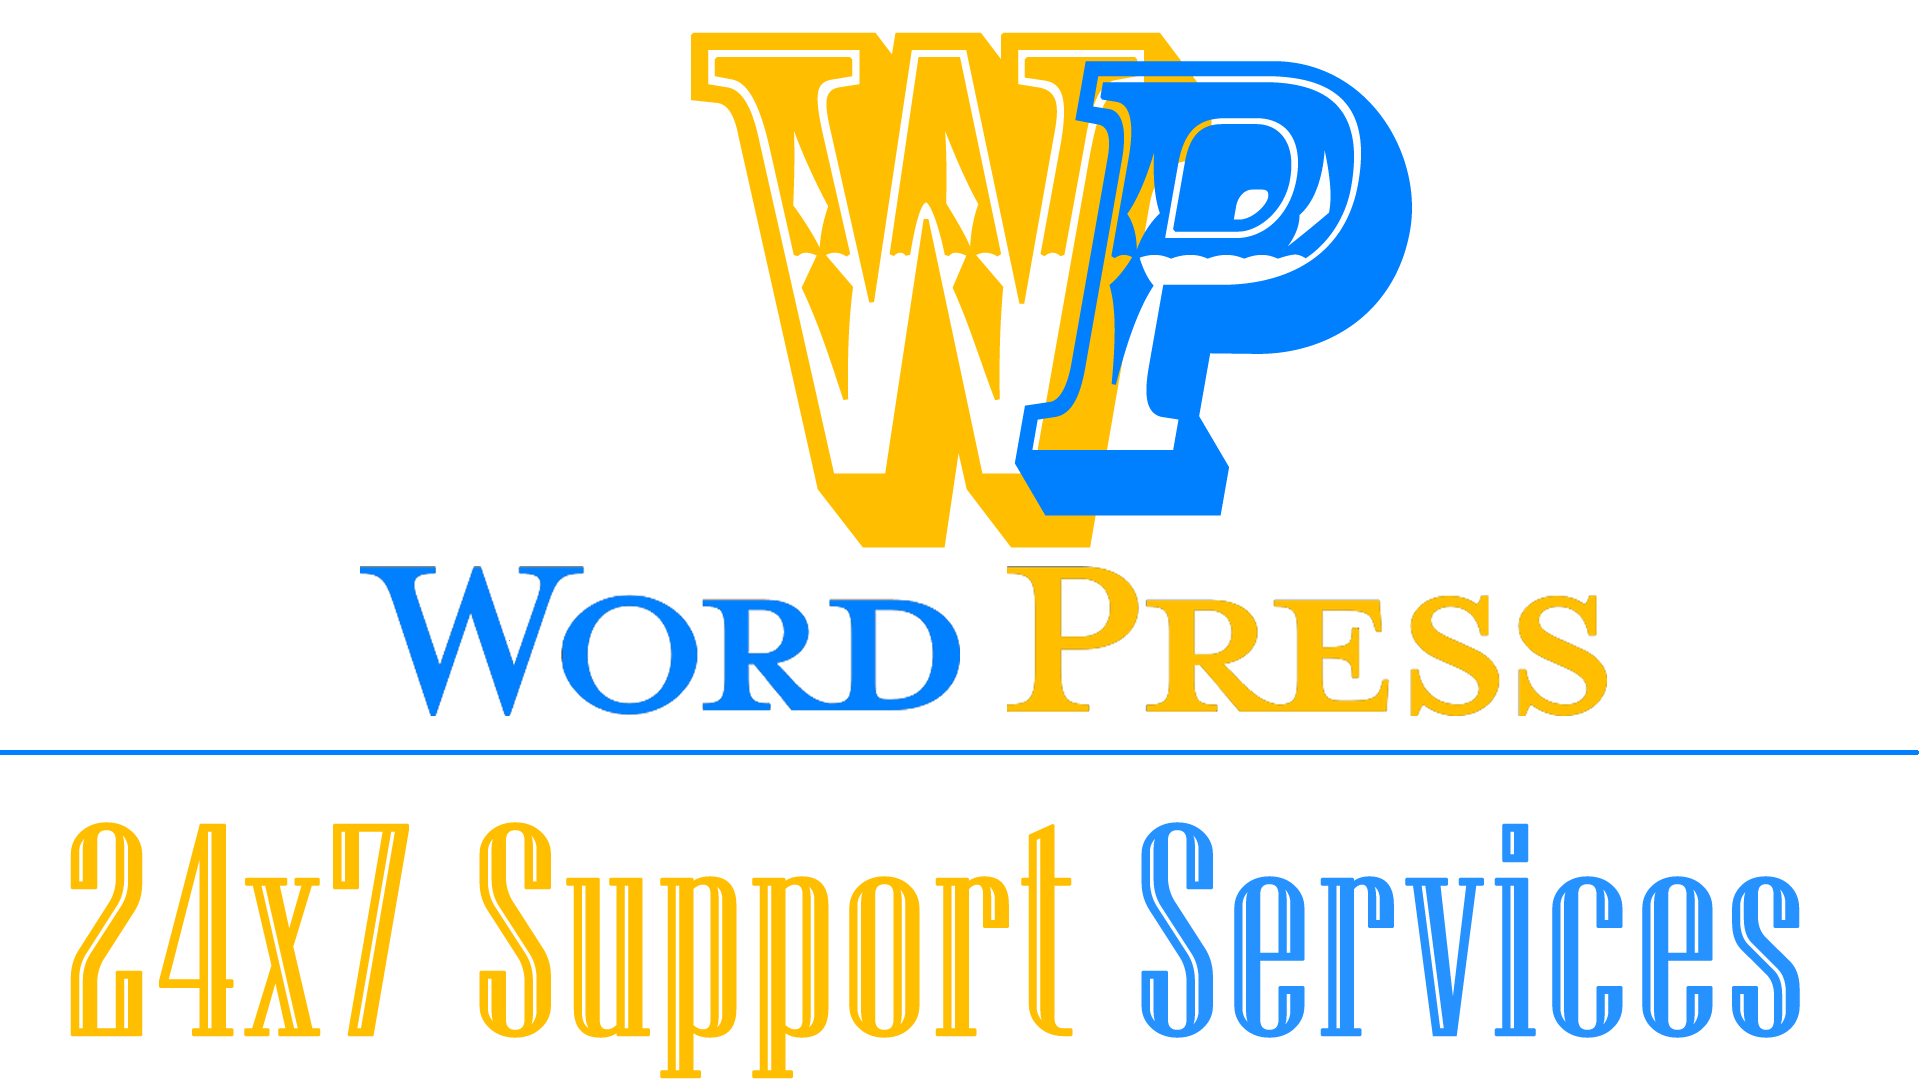 Phone Service Company Logo - WordPress Customer Service Phone Number 1-917-300-0312 – Official ...